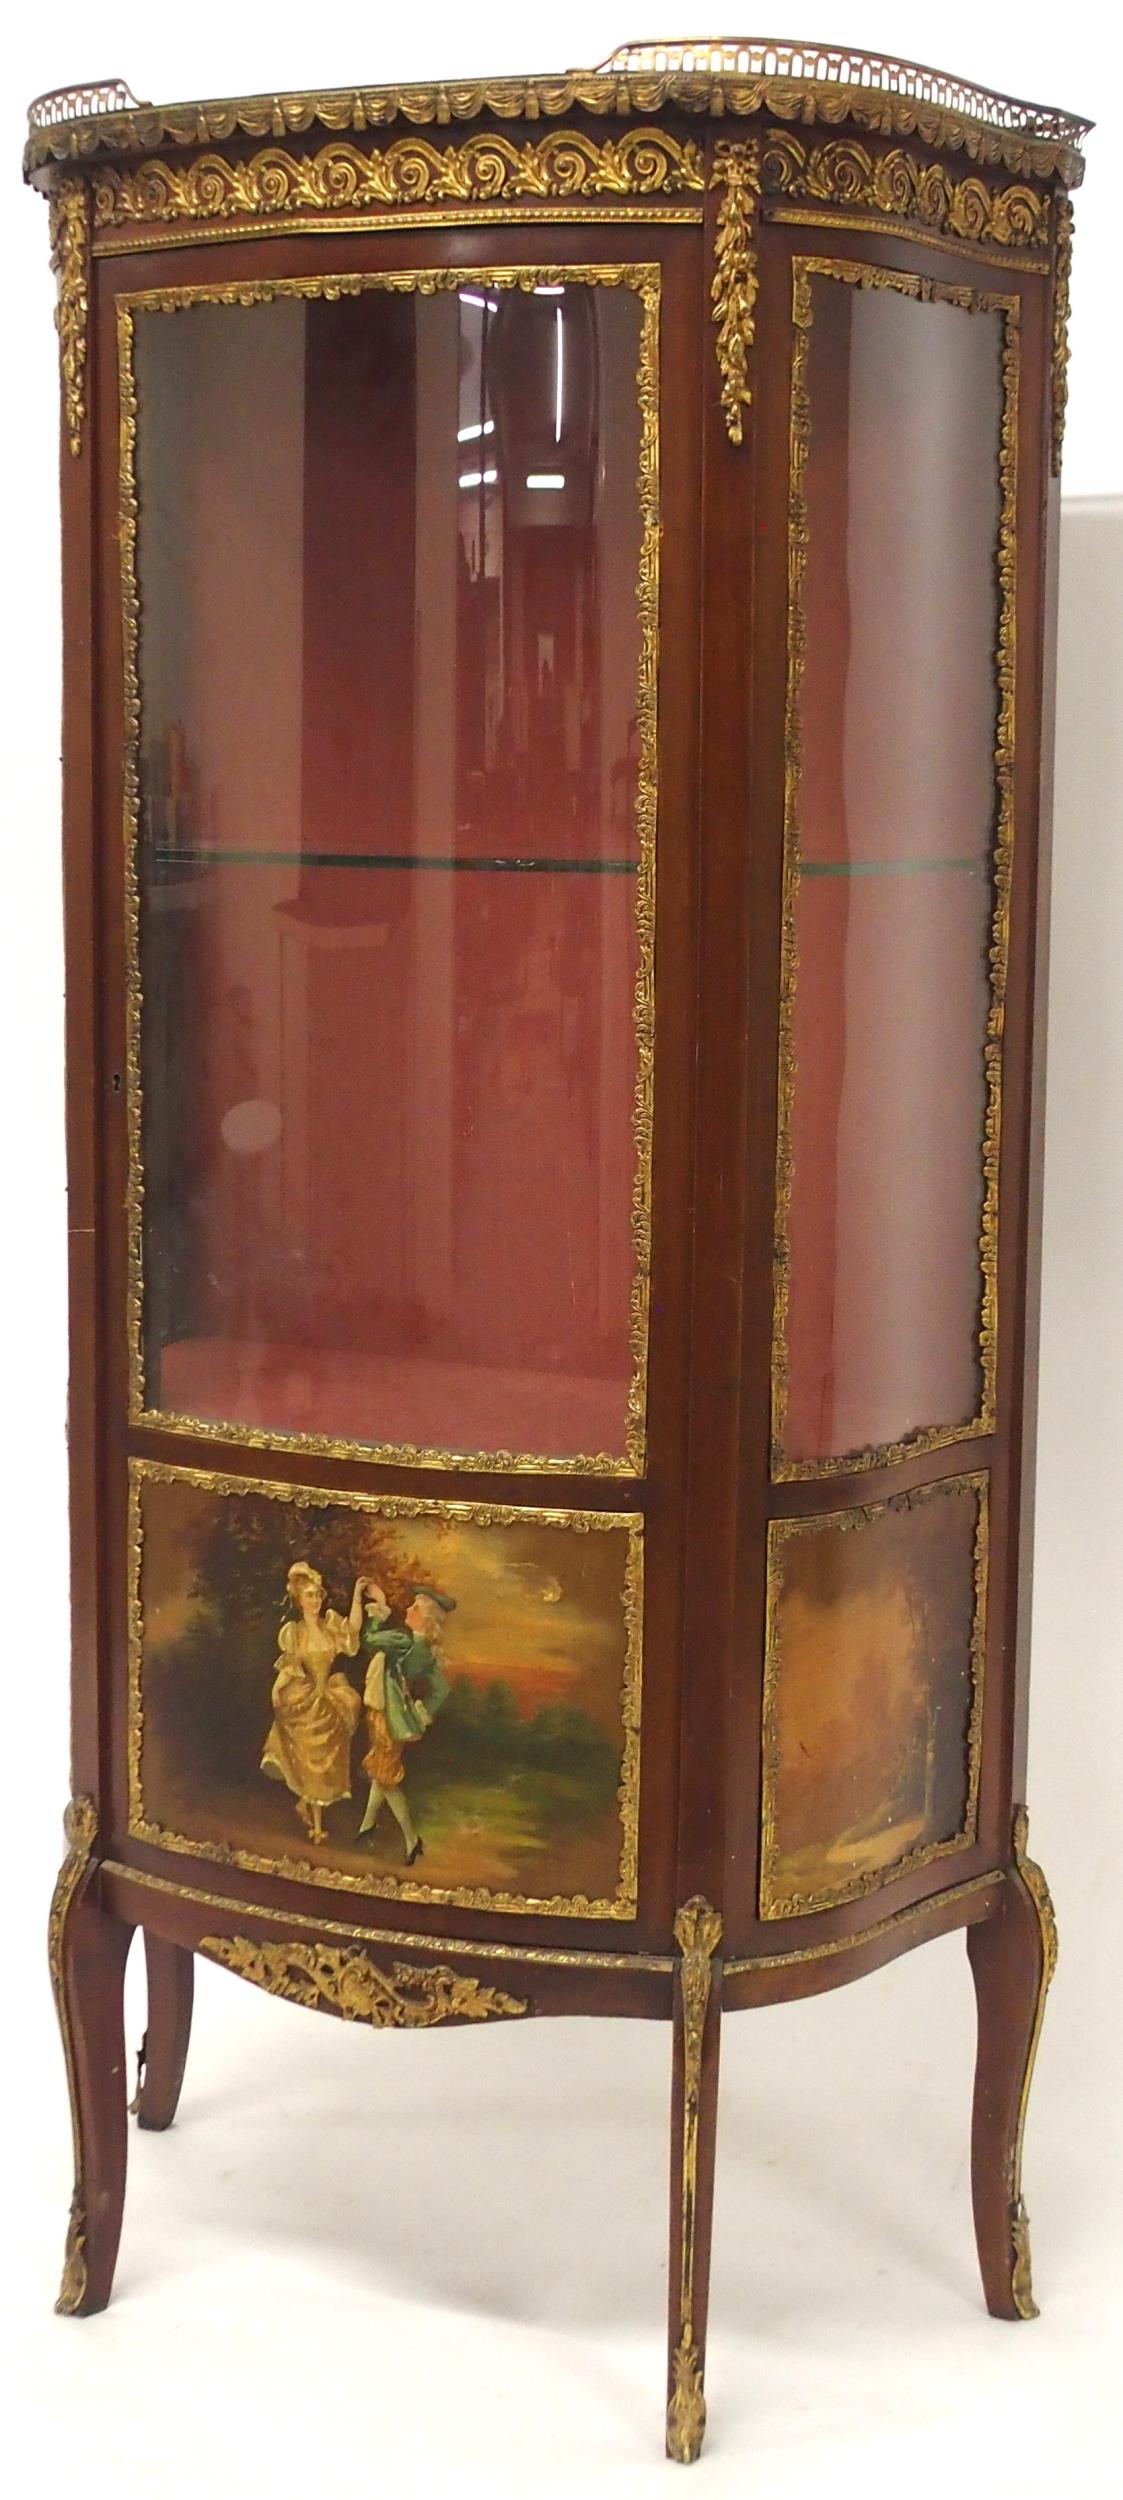 AN EARLY 20TH CENTURY LOUIS XV STYLE BRASS ORMOLU MOUNTED VITRINE DISPLAY CABINET  with galleried - Image 7 of 10